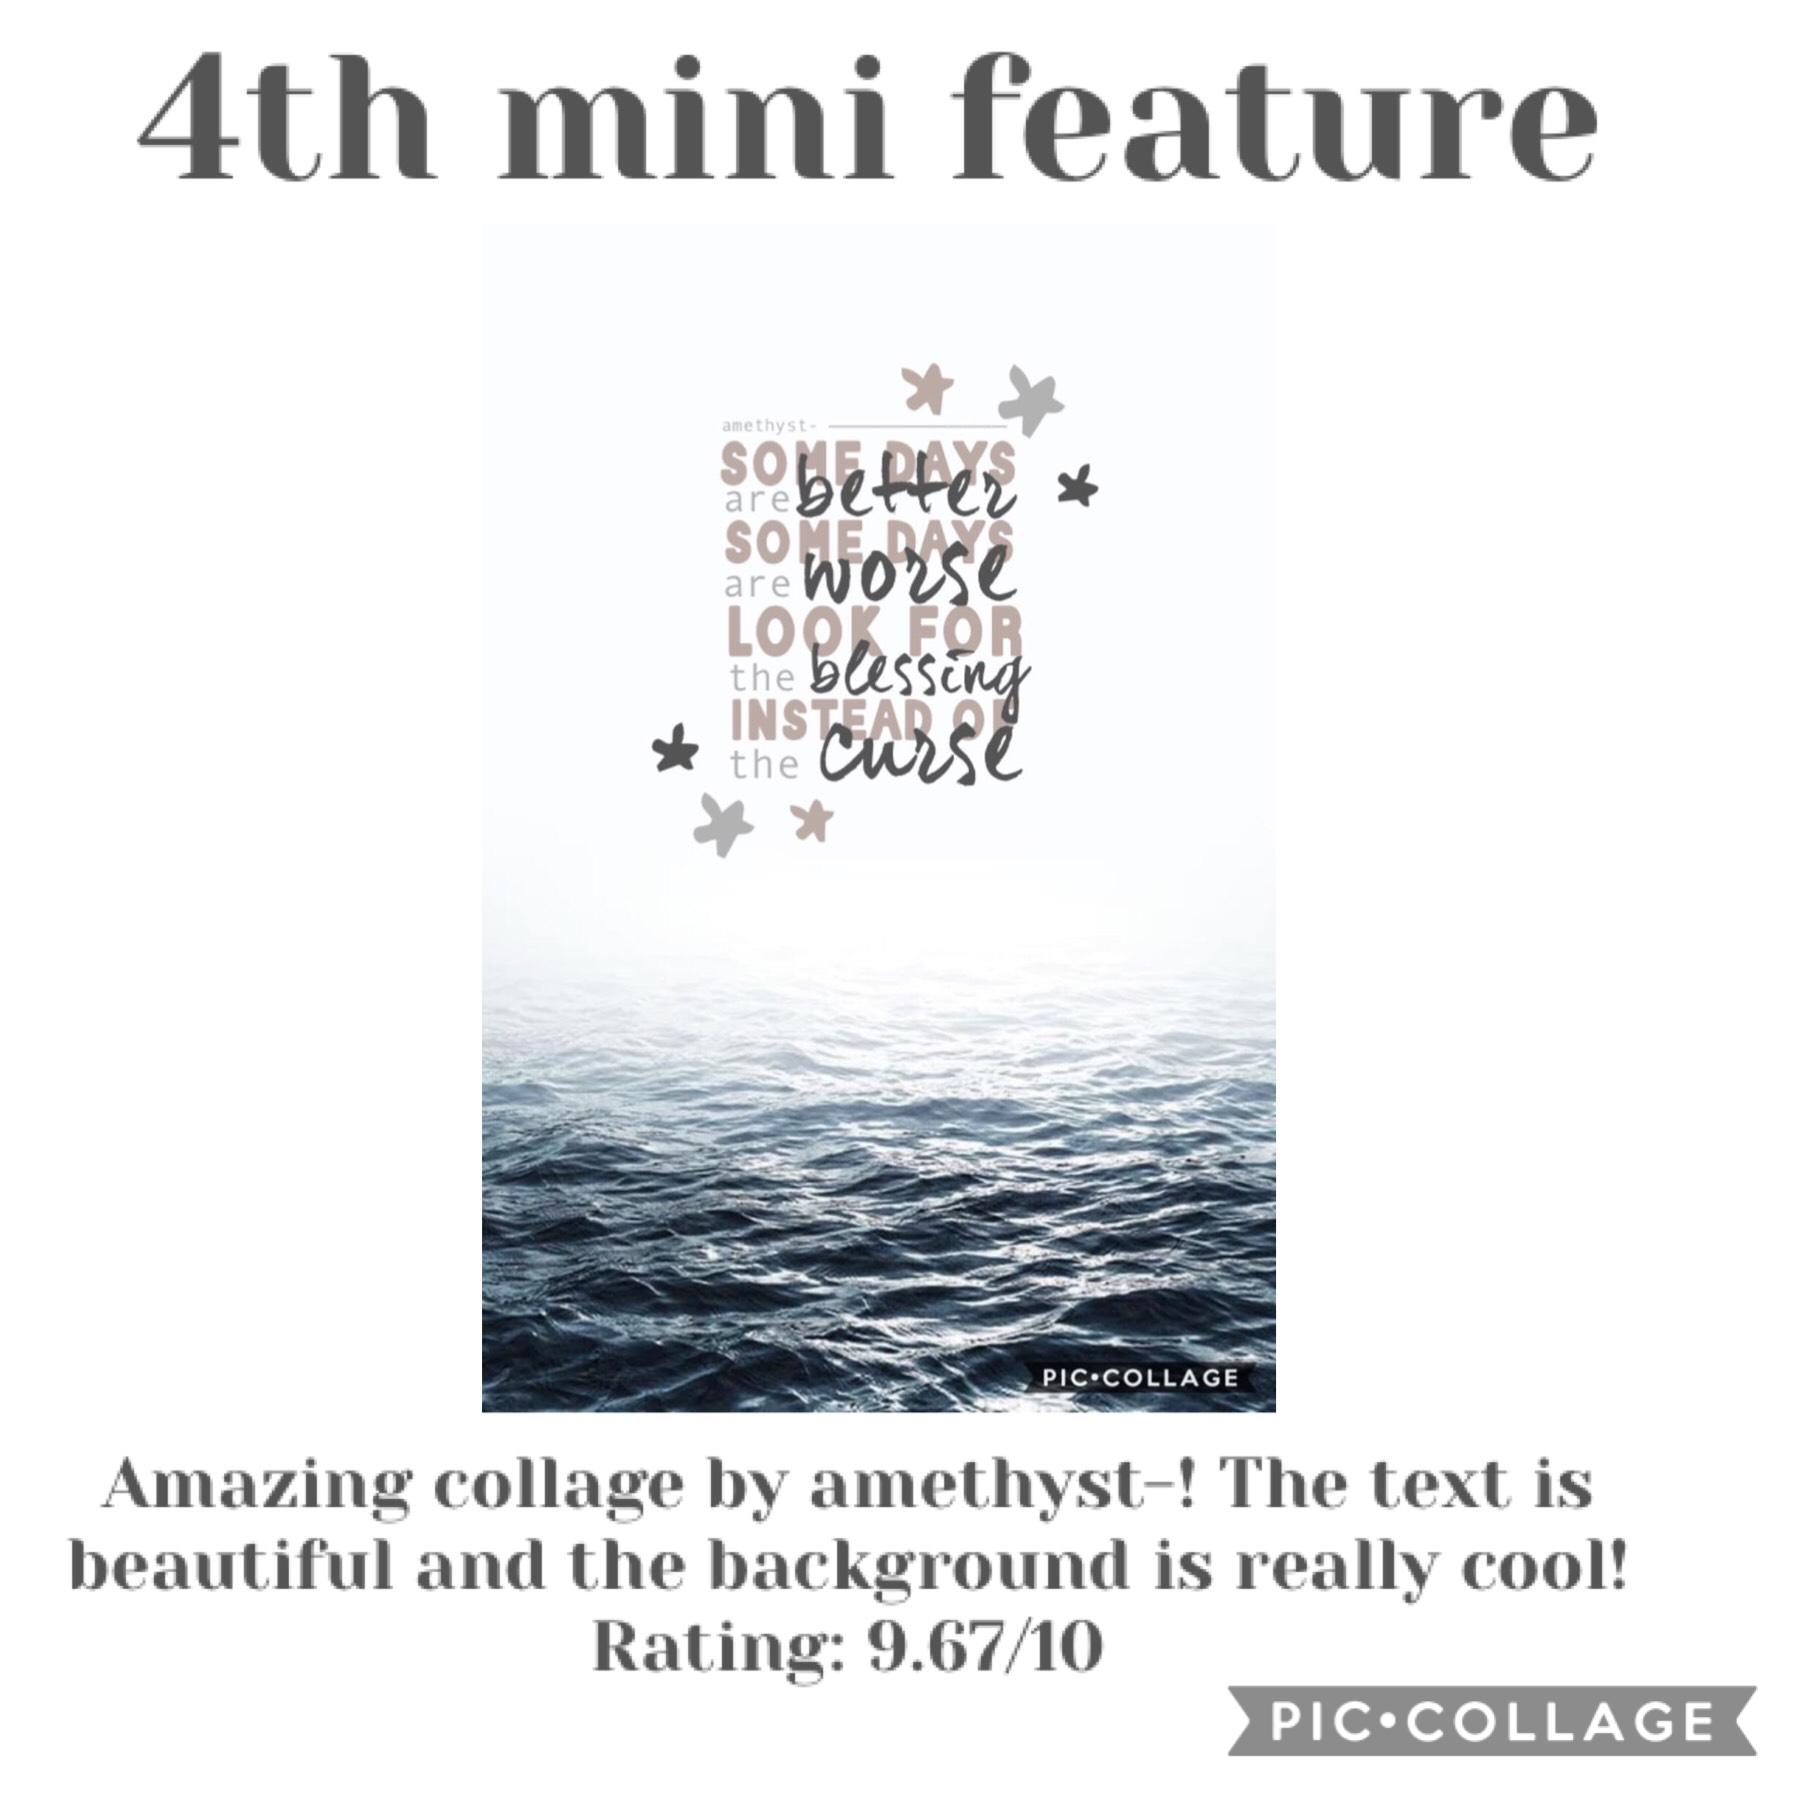 4th mini feature credit to...
amethyst-!!